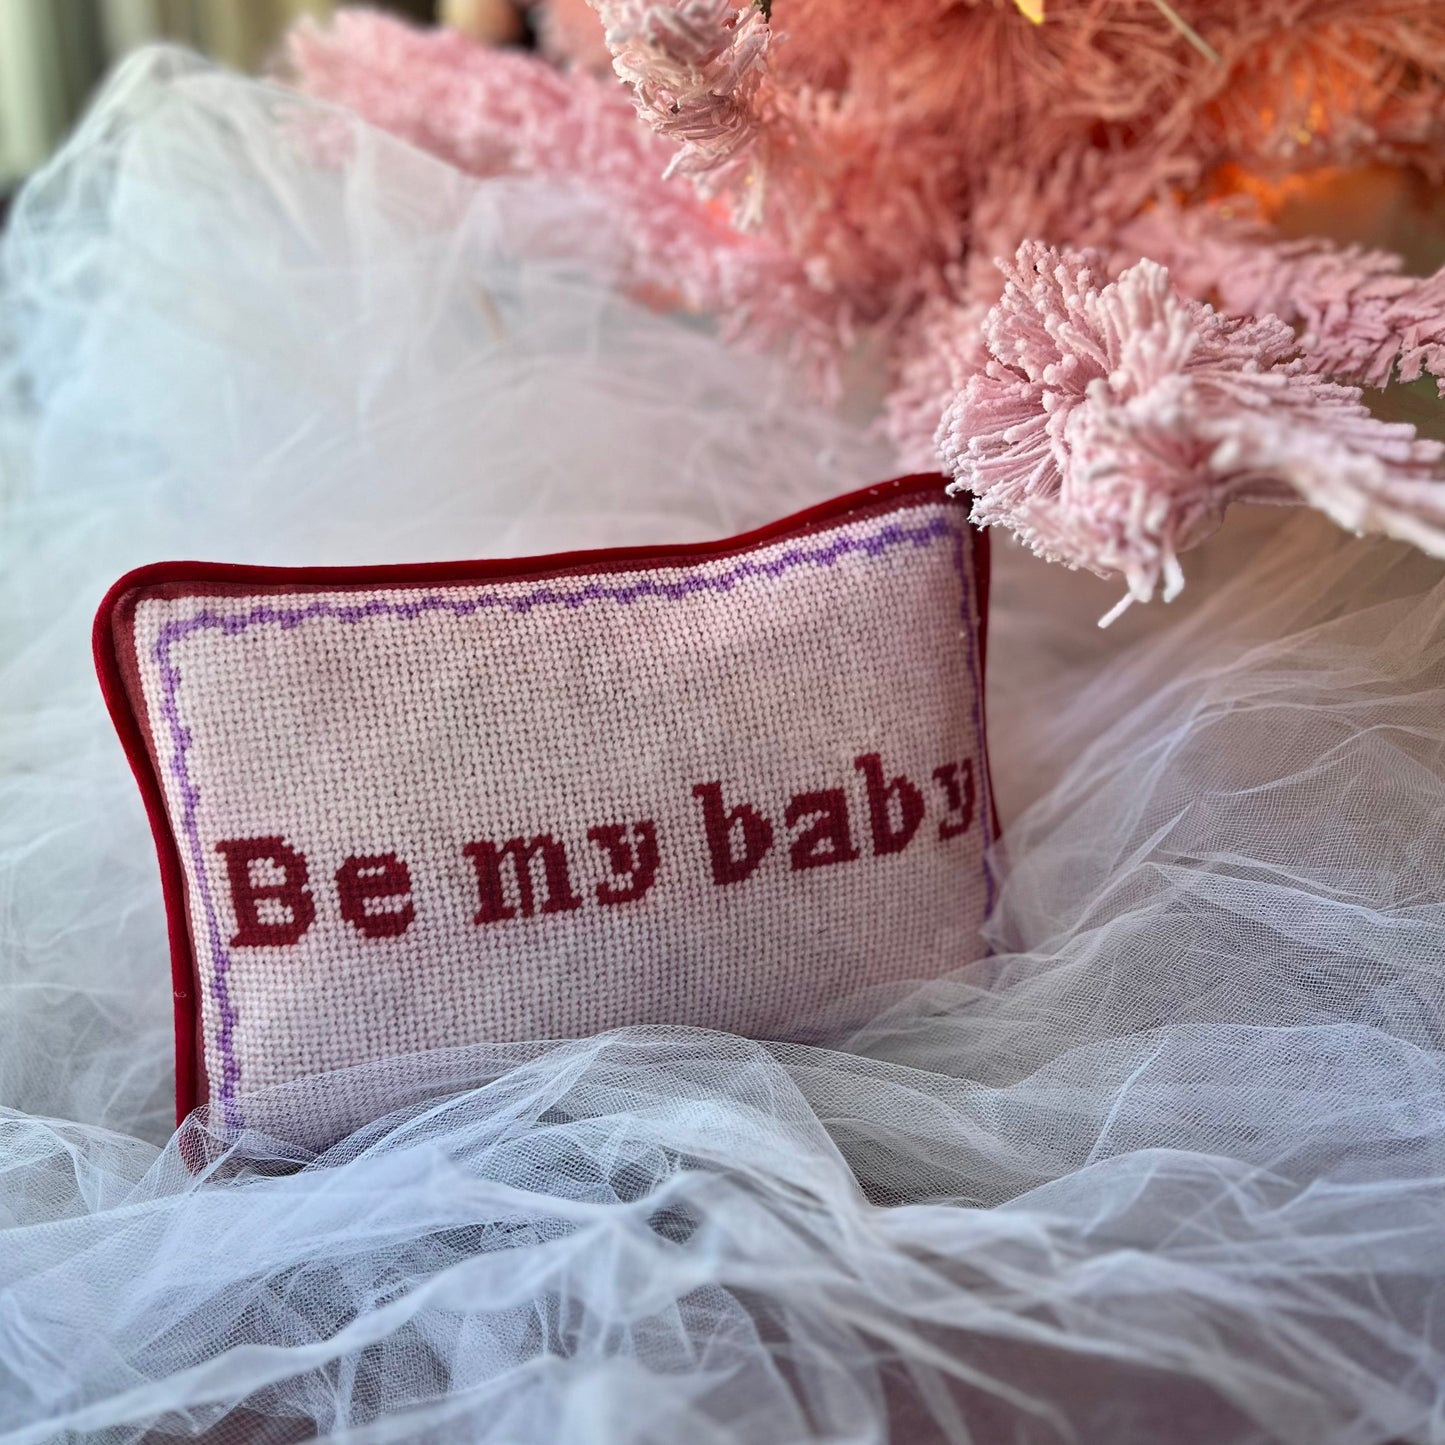 Pink velvet pillow with red letters that say "Be My Baby"; lavender wavy border.